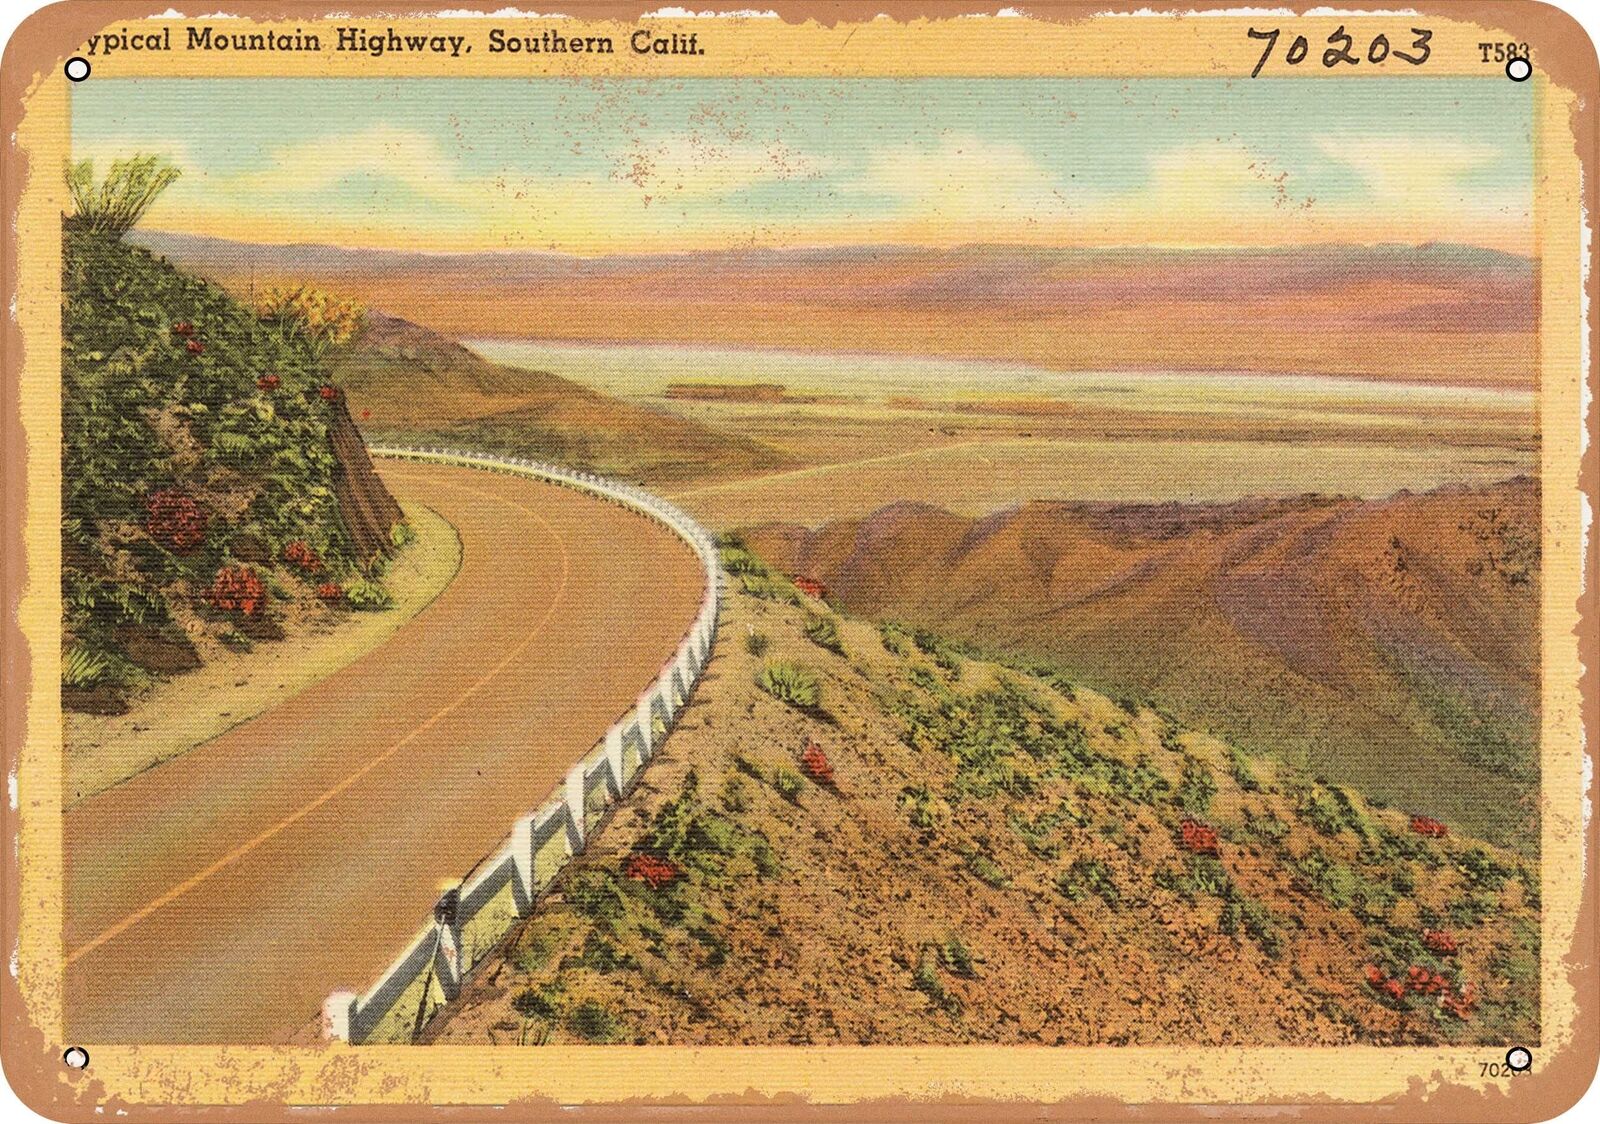 Metal Sign - California Postcard - Typical Mountain Highway, Southern Calif.